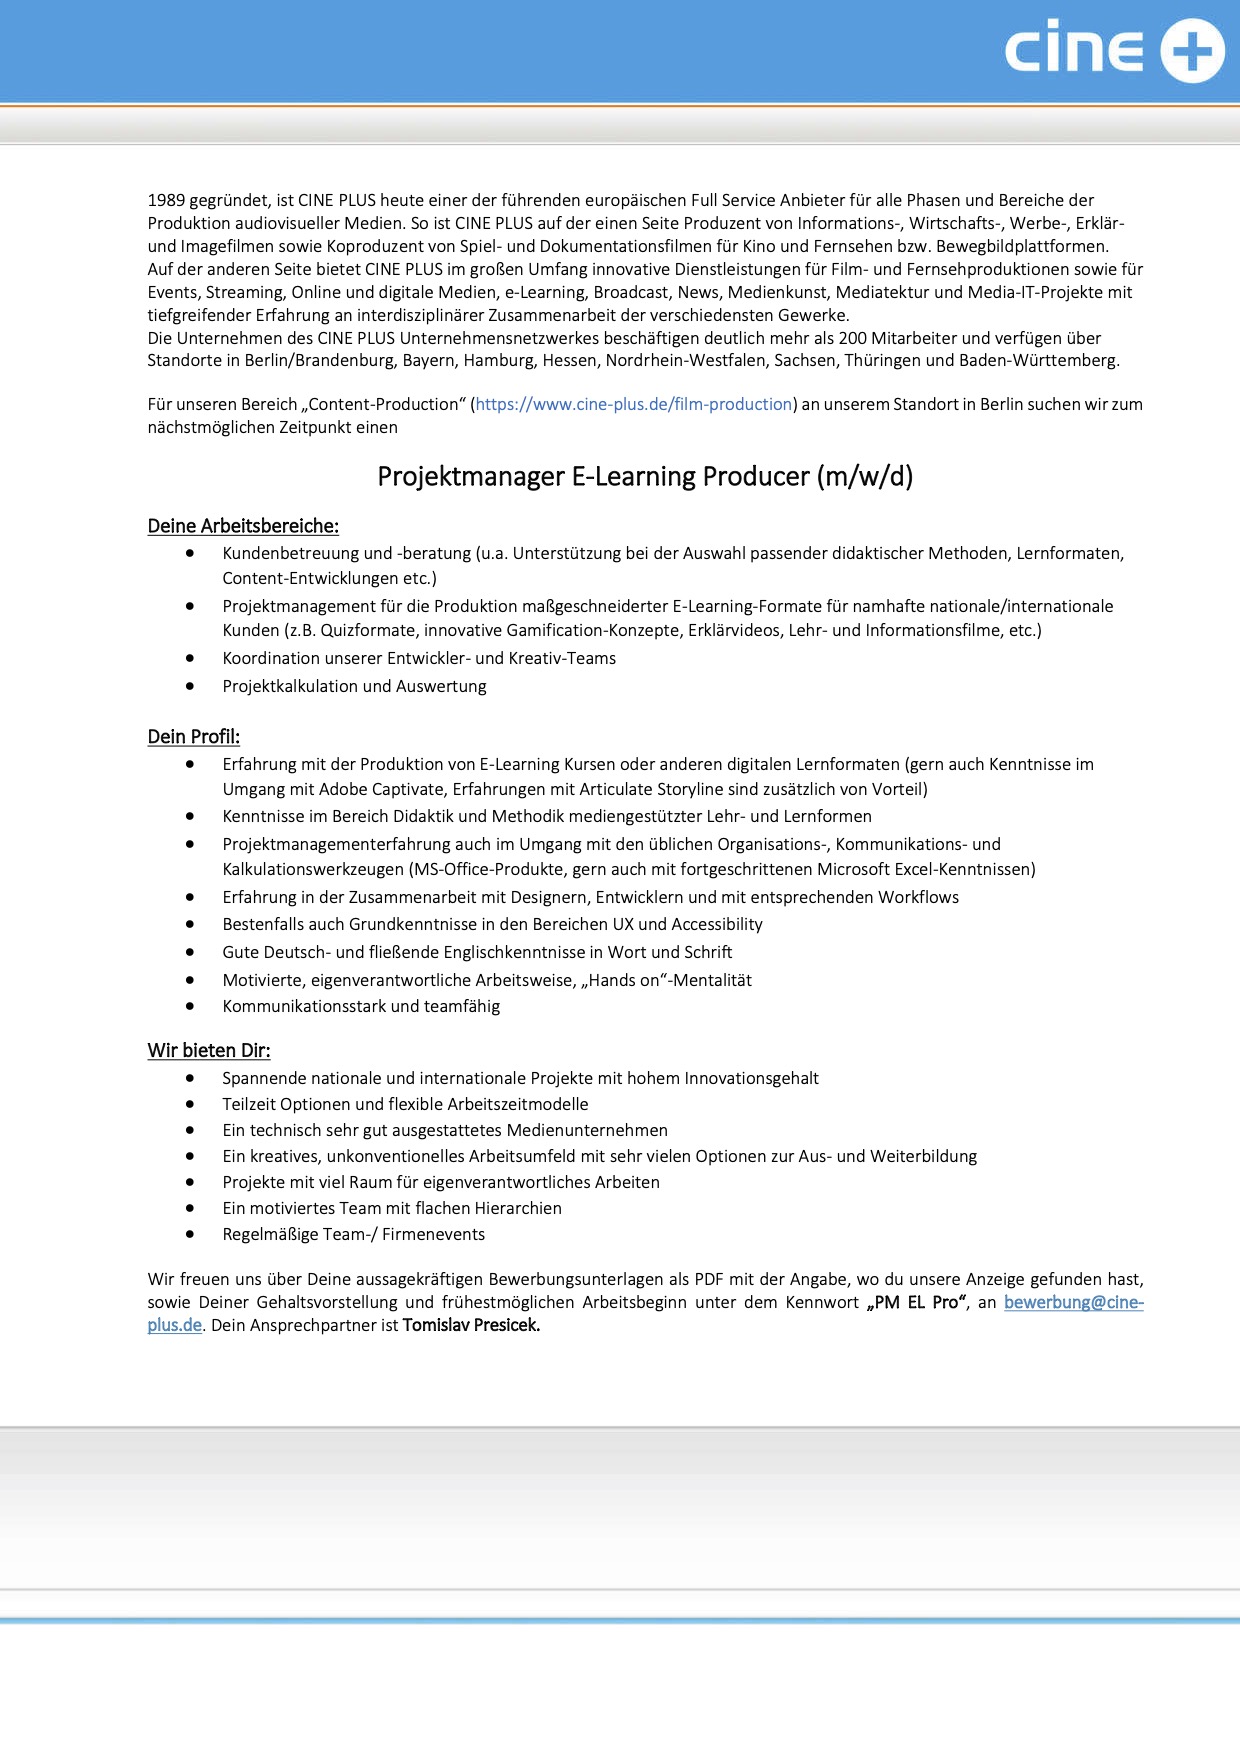 Projektmanager E-Learning Producer (m/w/d)